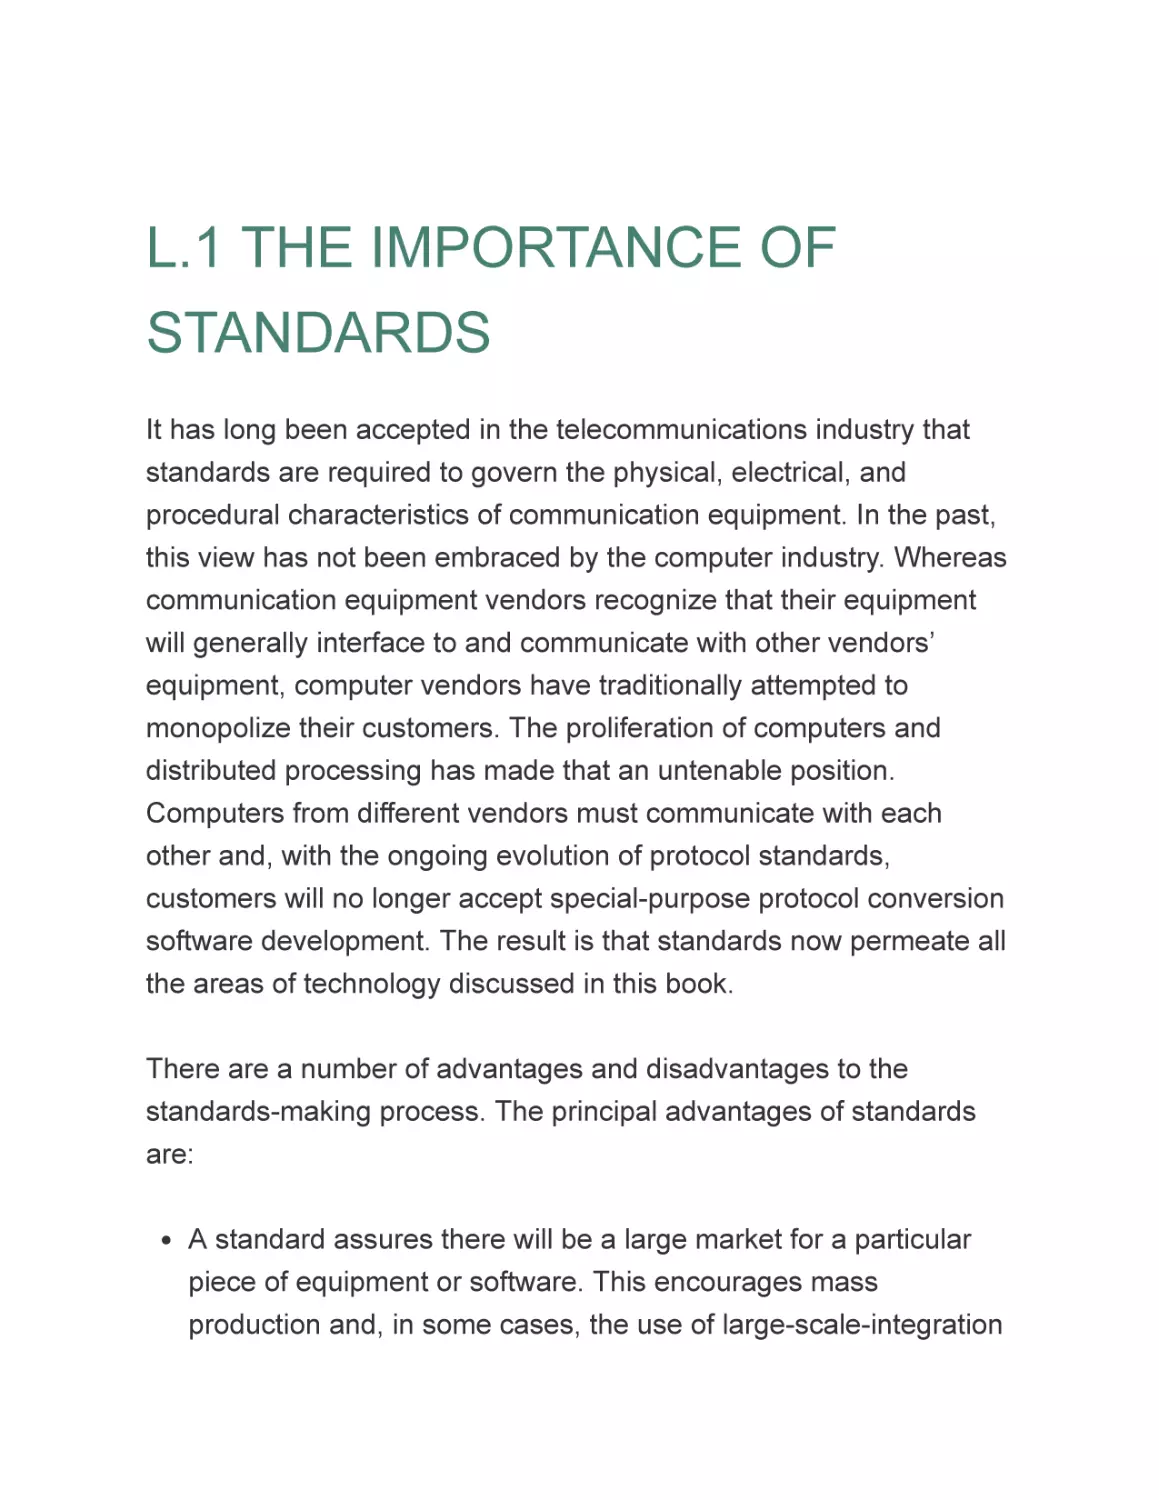 L.1 THE IMPORTANCE OF STANDARDS